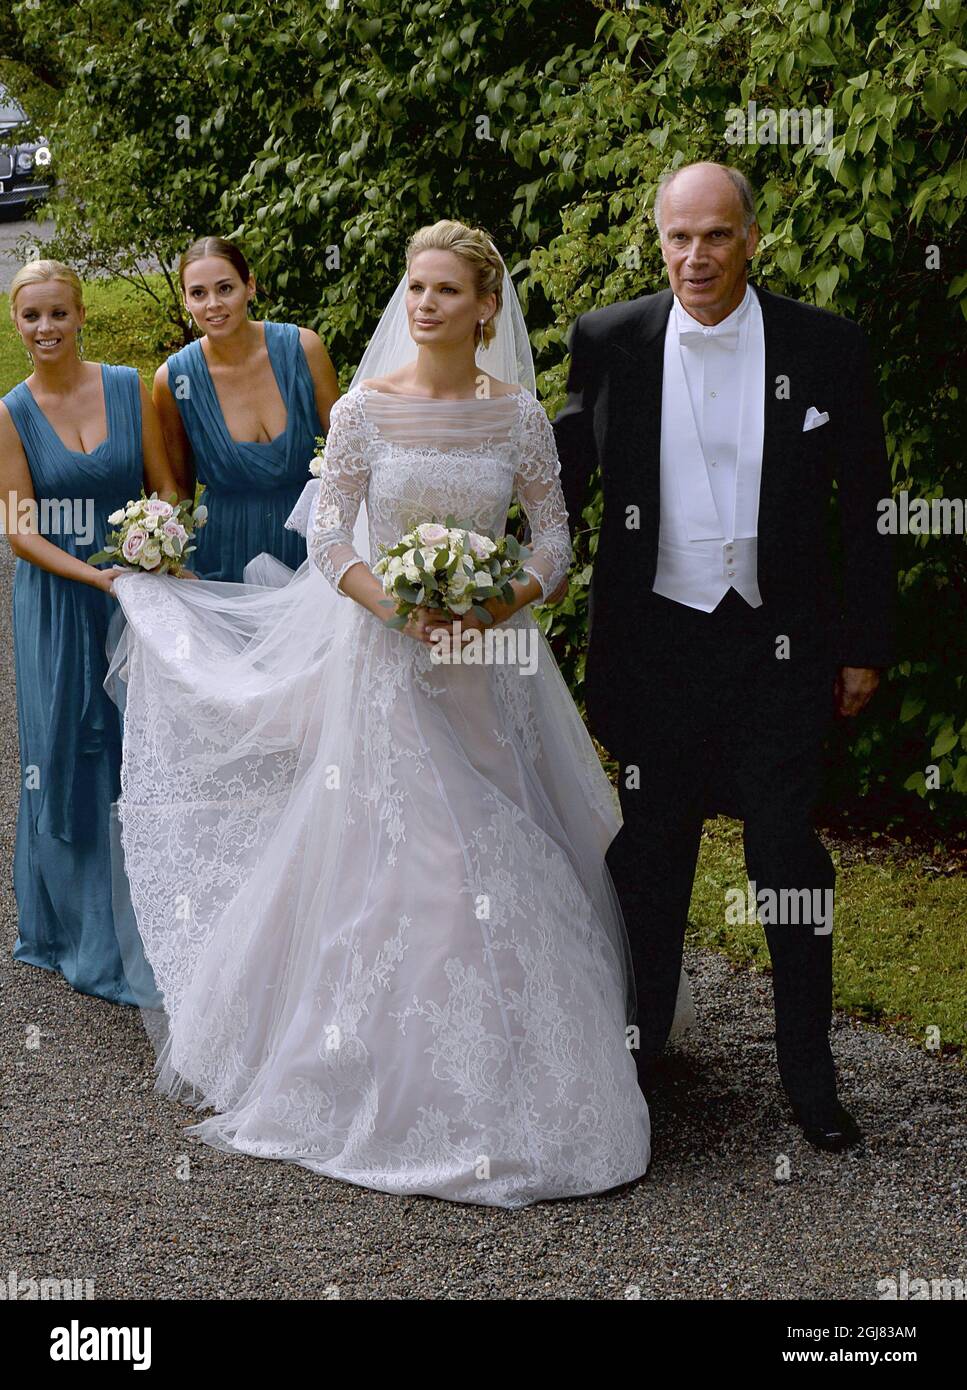 STOCKHOLM 2013-08-31 Bride Vicky AndrÃ©n and her father arrive to the wedding at the Ulriksdal Palace Chapel in Stockholm, Sweden, August 31, 2013. The Swedish Kings godson Gustaf Magnuson (son of Princess Christina and Tord Magnuson) married model Vicky AndrÃ©n Saturday. Photo Jonas Ekstromer / SCANPIX / ** SWEDEN OUT ** Stock Photo